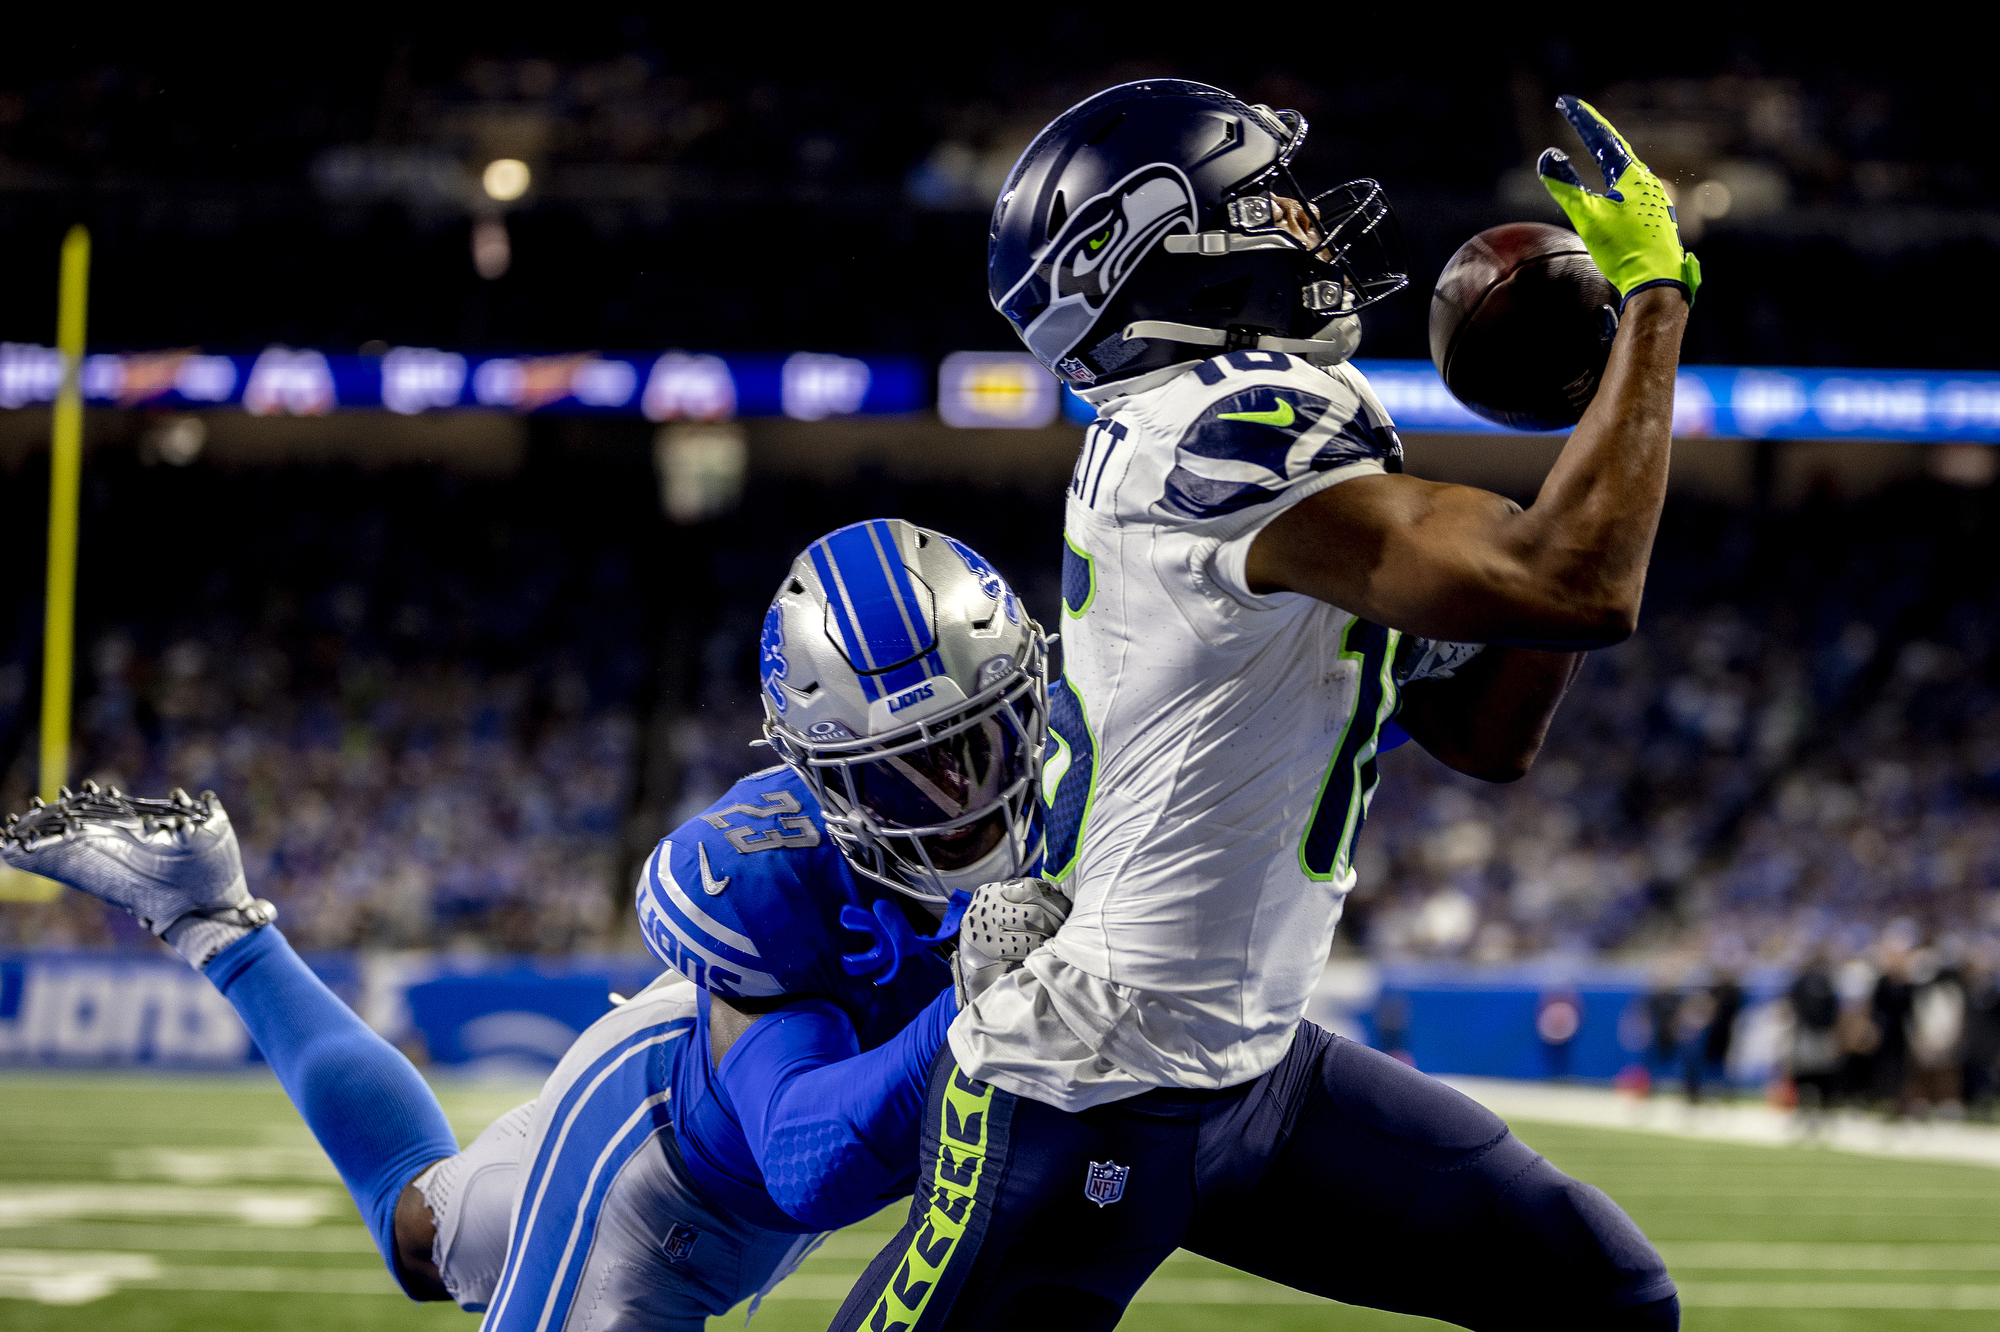 Lockett's touchdown in overtime clinches Seahawks' 37-31 win over